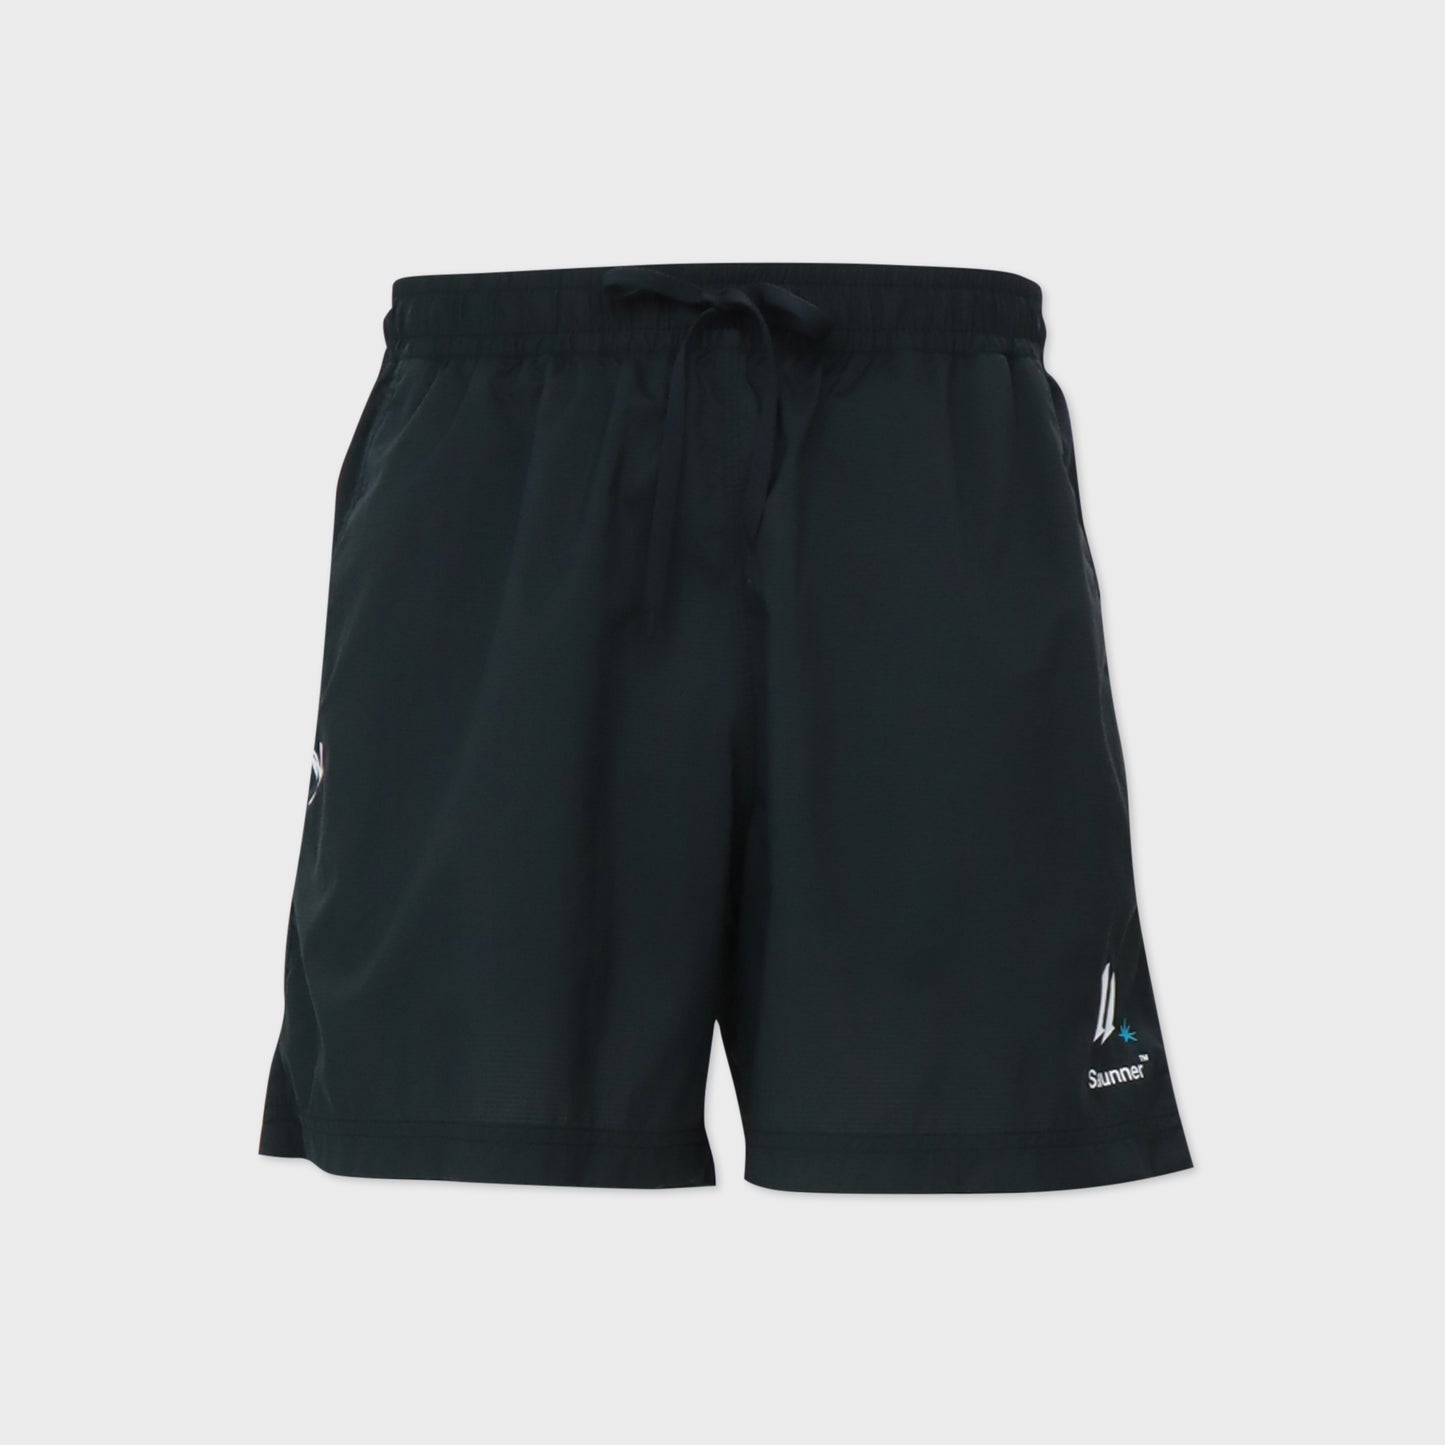 AFTWATER/ WOVEN SHORTS - Black